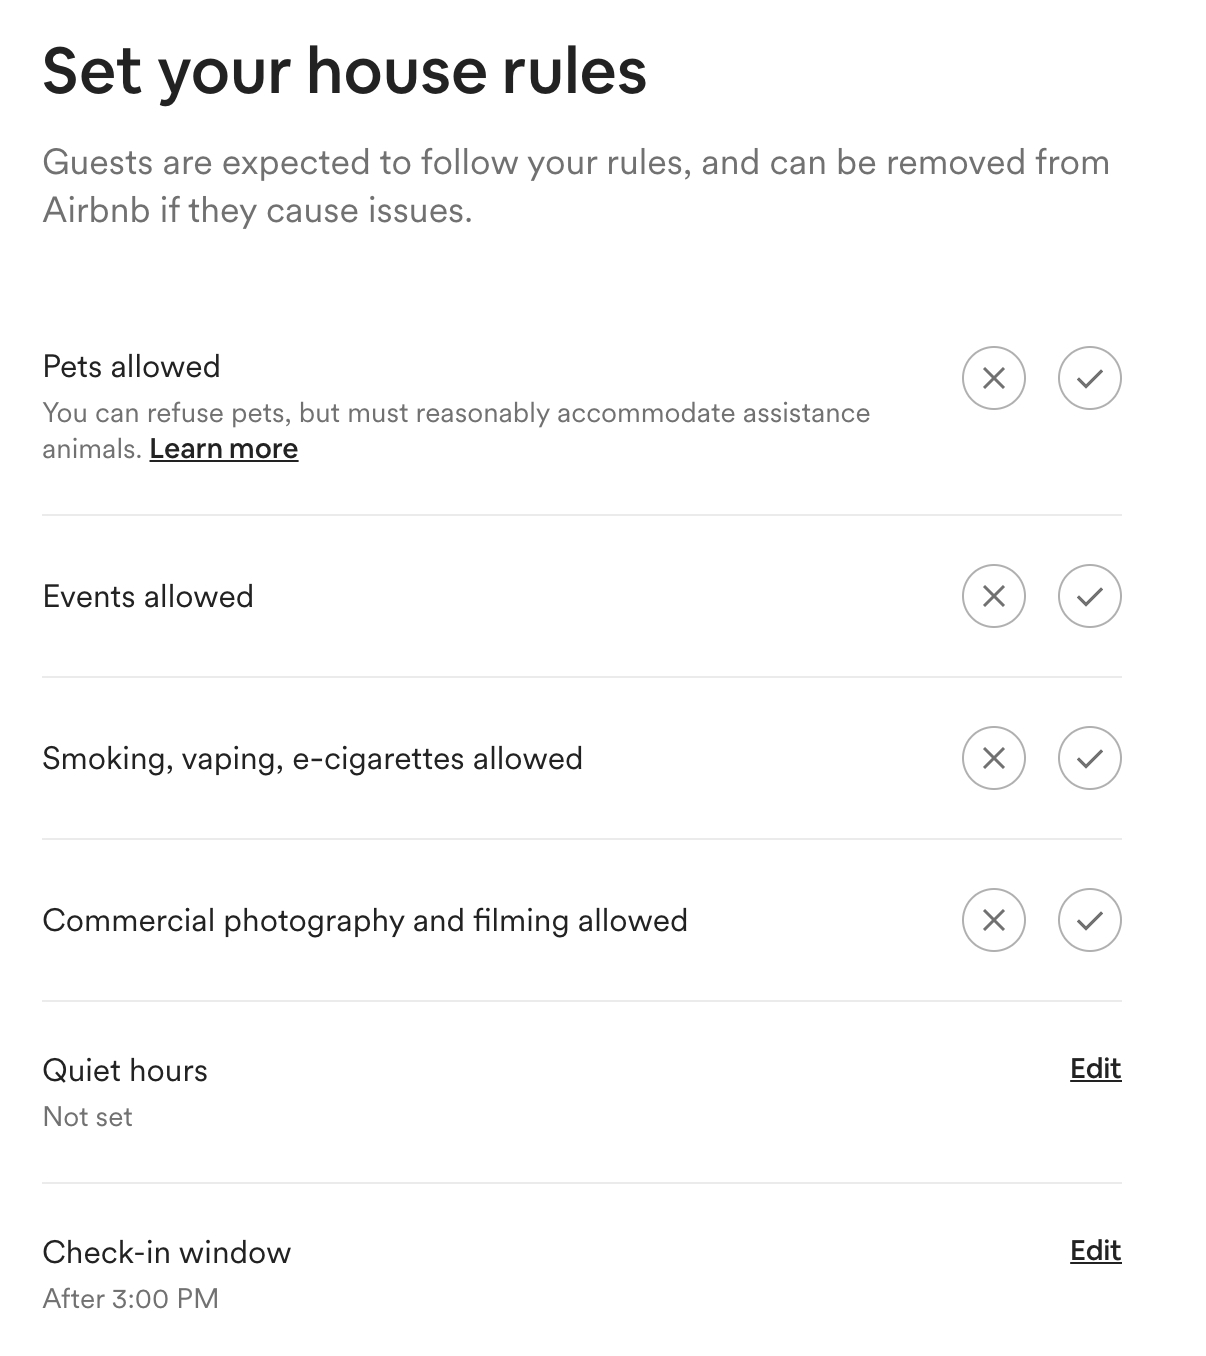 Airbnb preset house rules